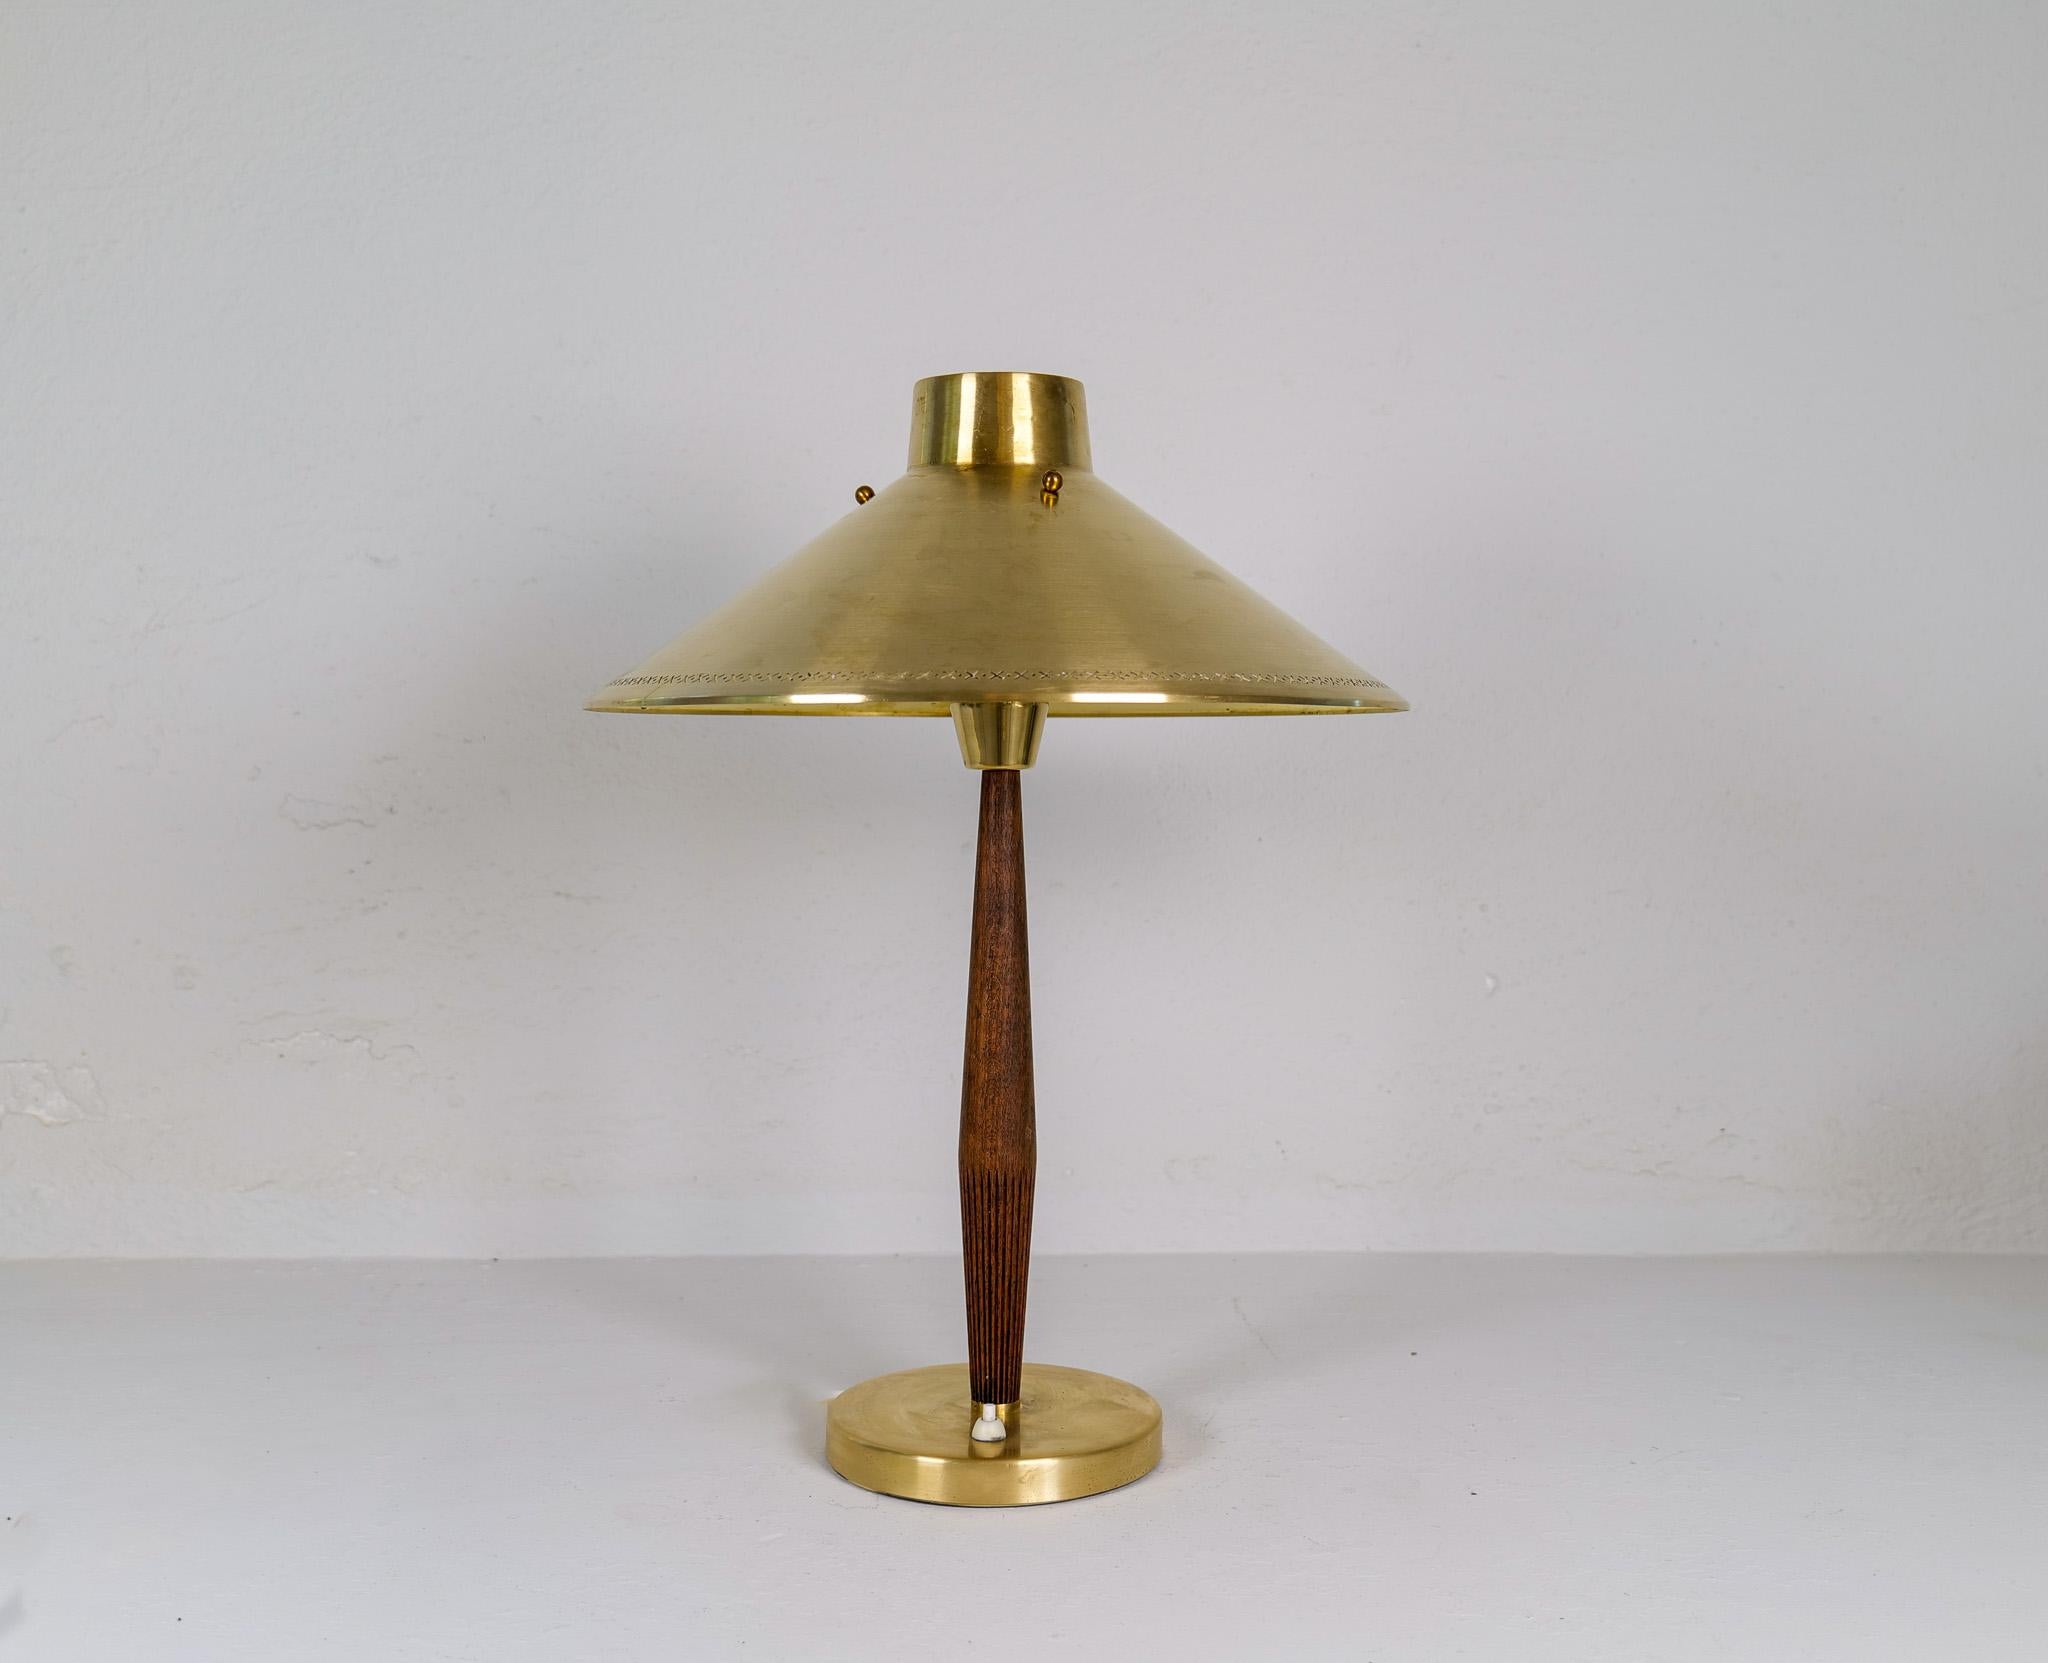 Elegant Swedish table lamp made in 1940 for ASEA and designed by Hans Bergström. A metal and brass base with beech leading up to a patinated brass shade in a nice combination. 

Good condition with some wear consistent with age and use, the brass